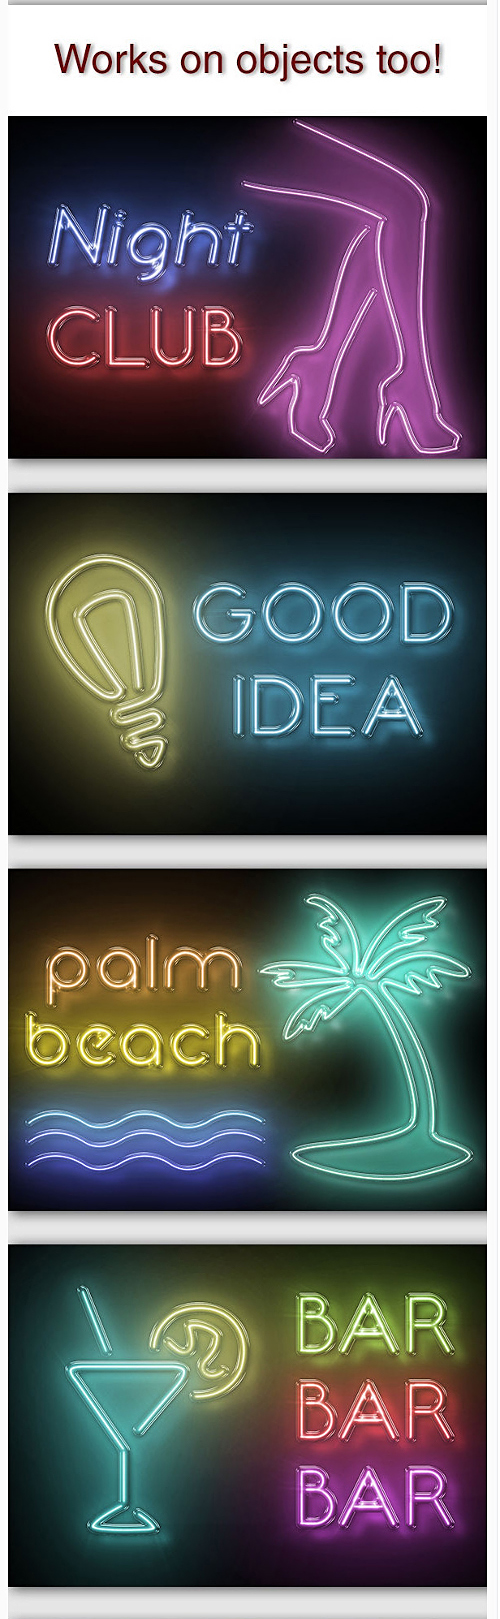 Neon Text Effect - Photoshop Actions A4 300DPI